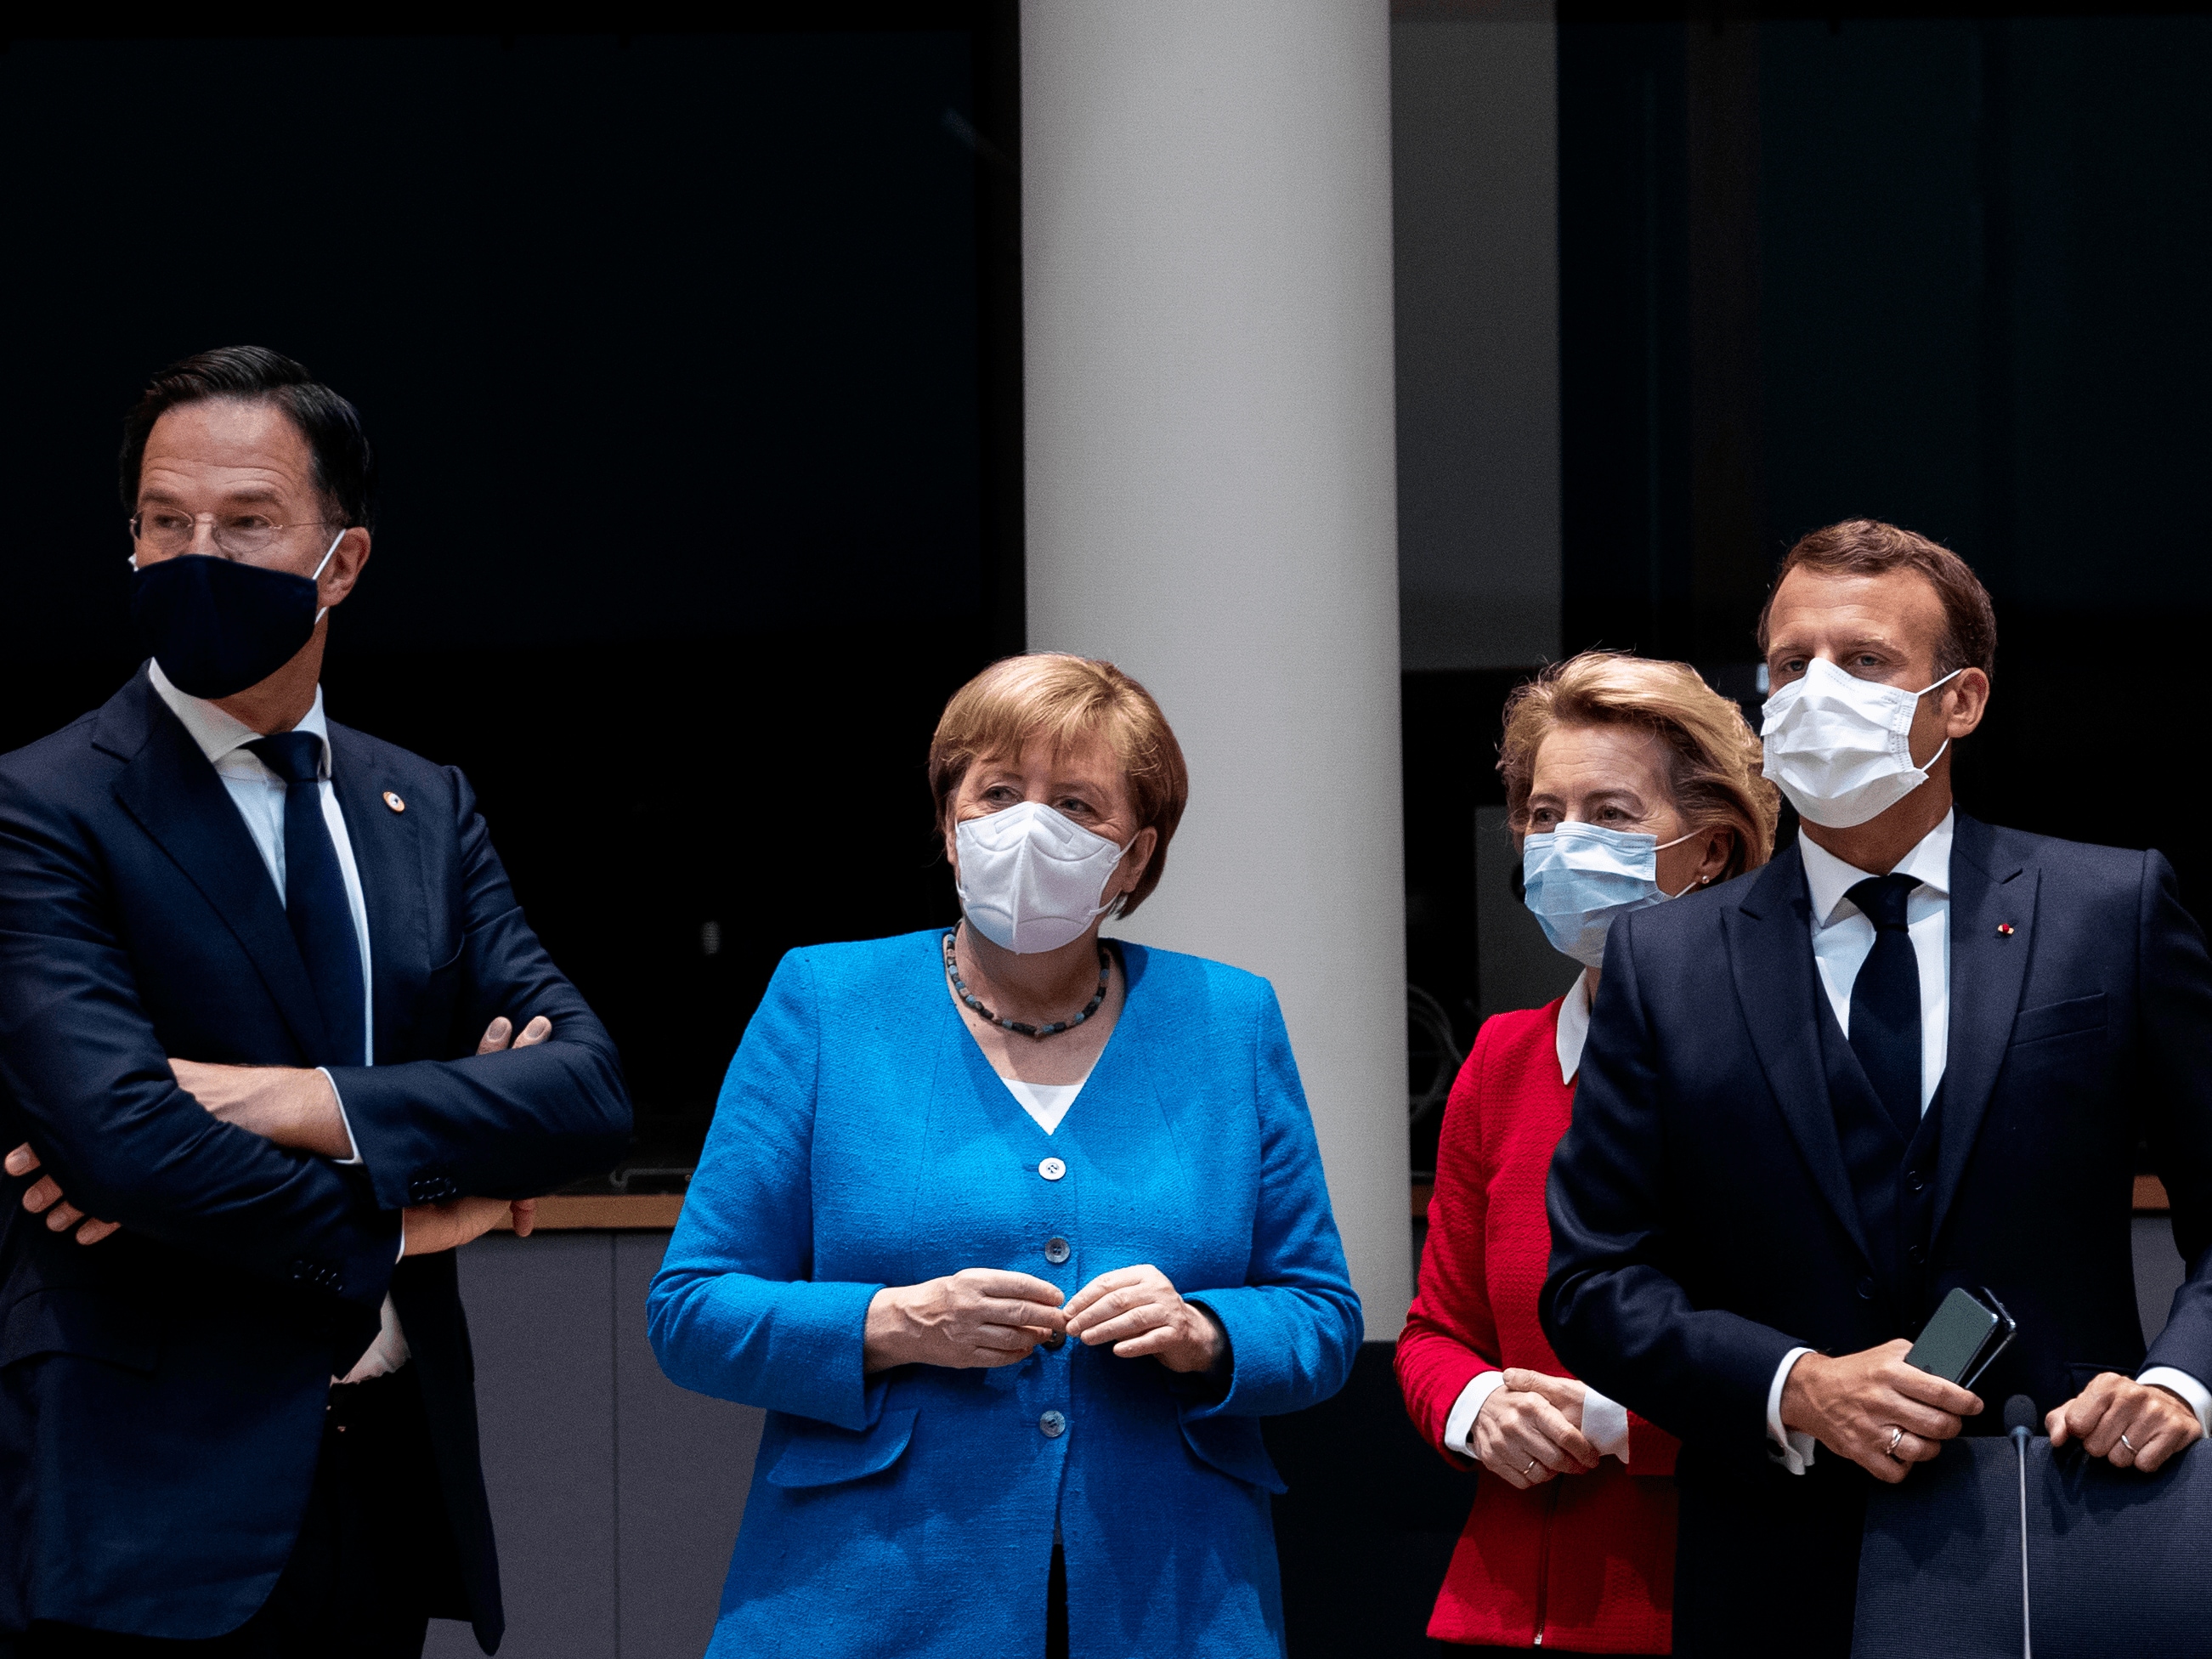 EU leaders finally agree on a pandemic fiscal package